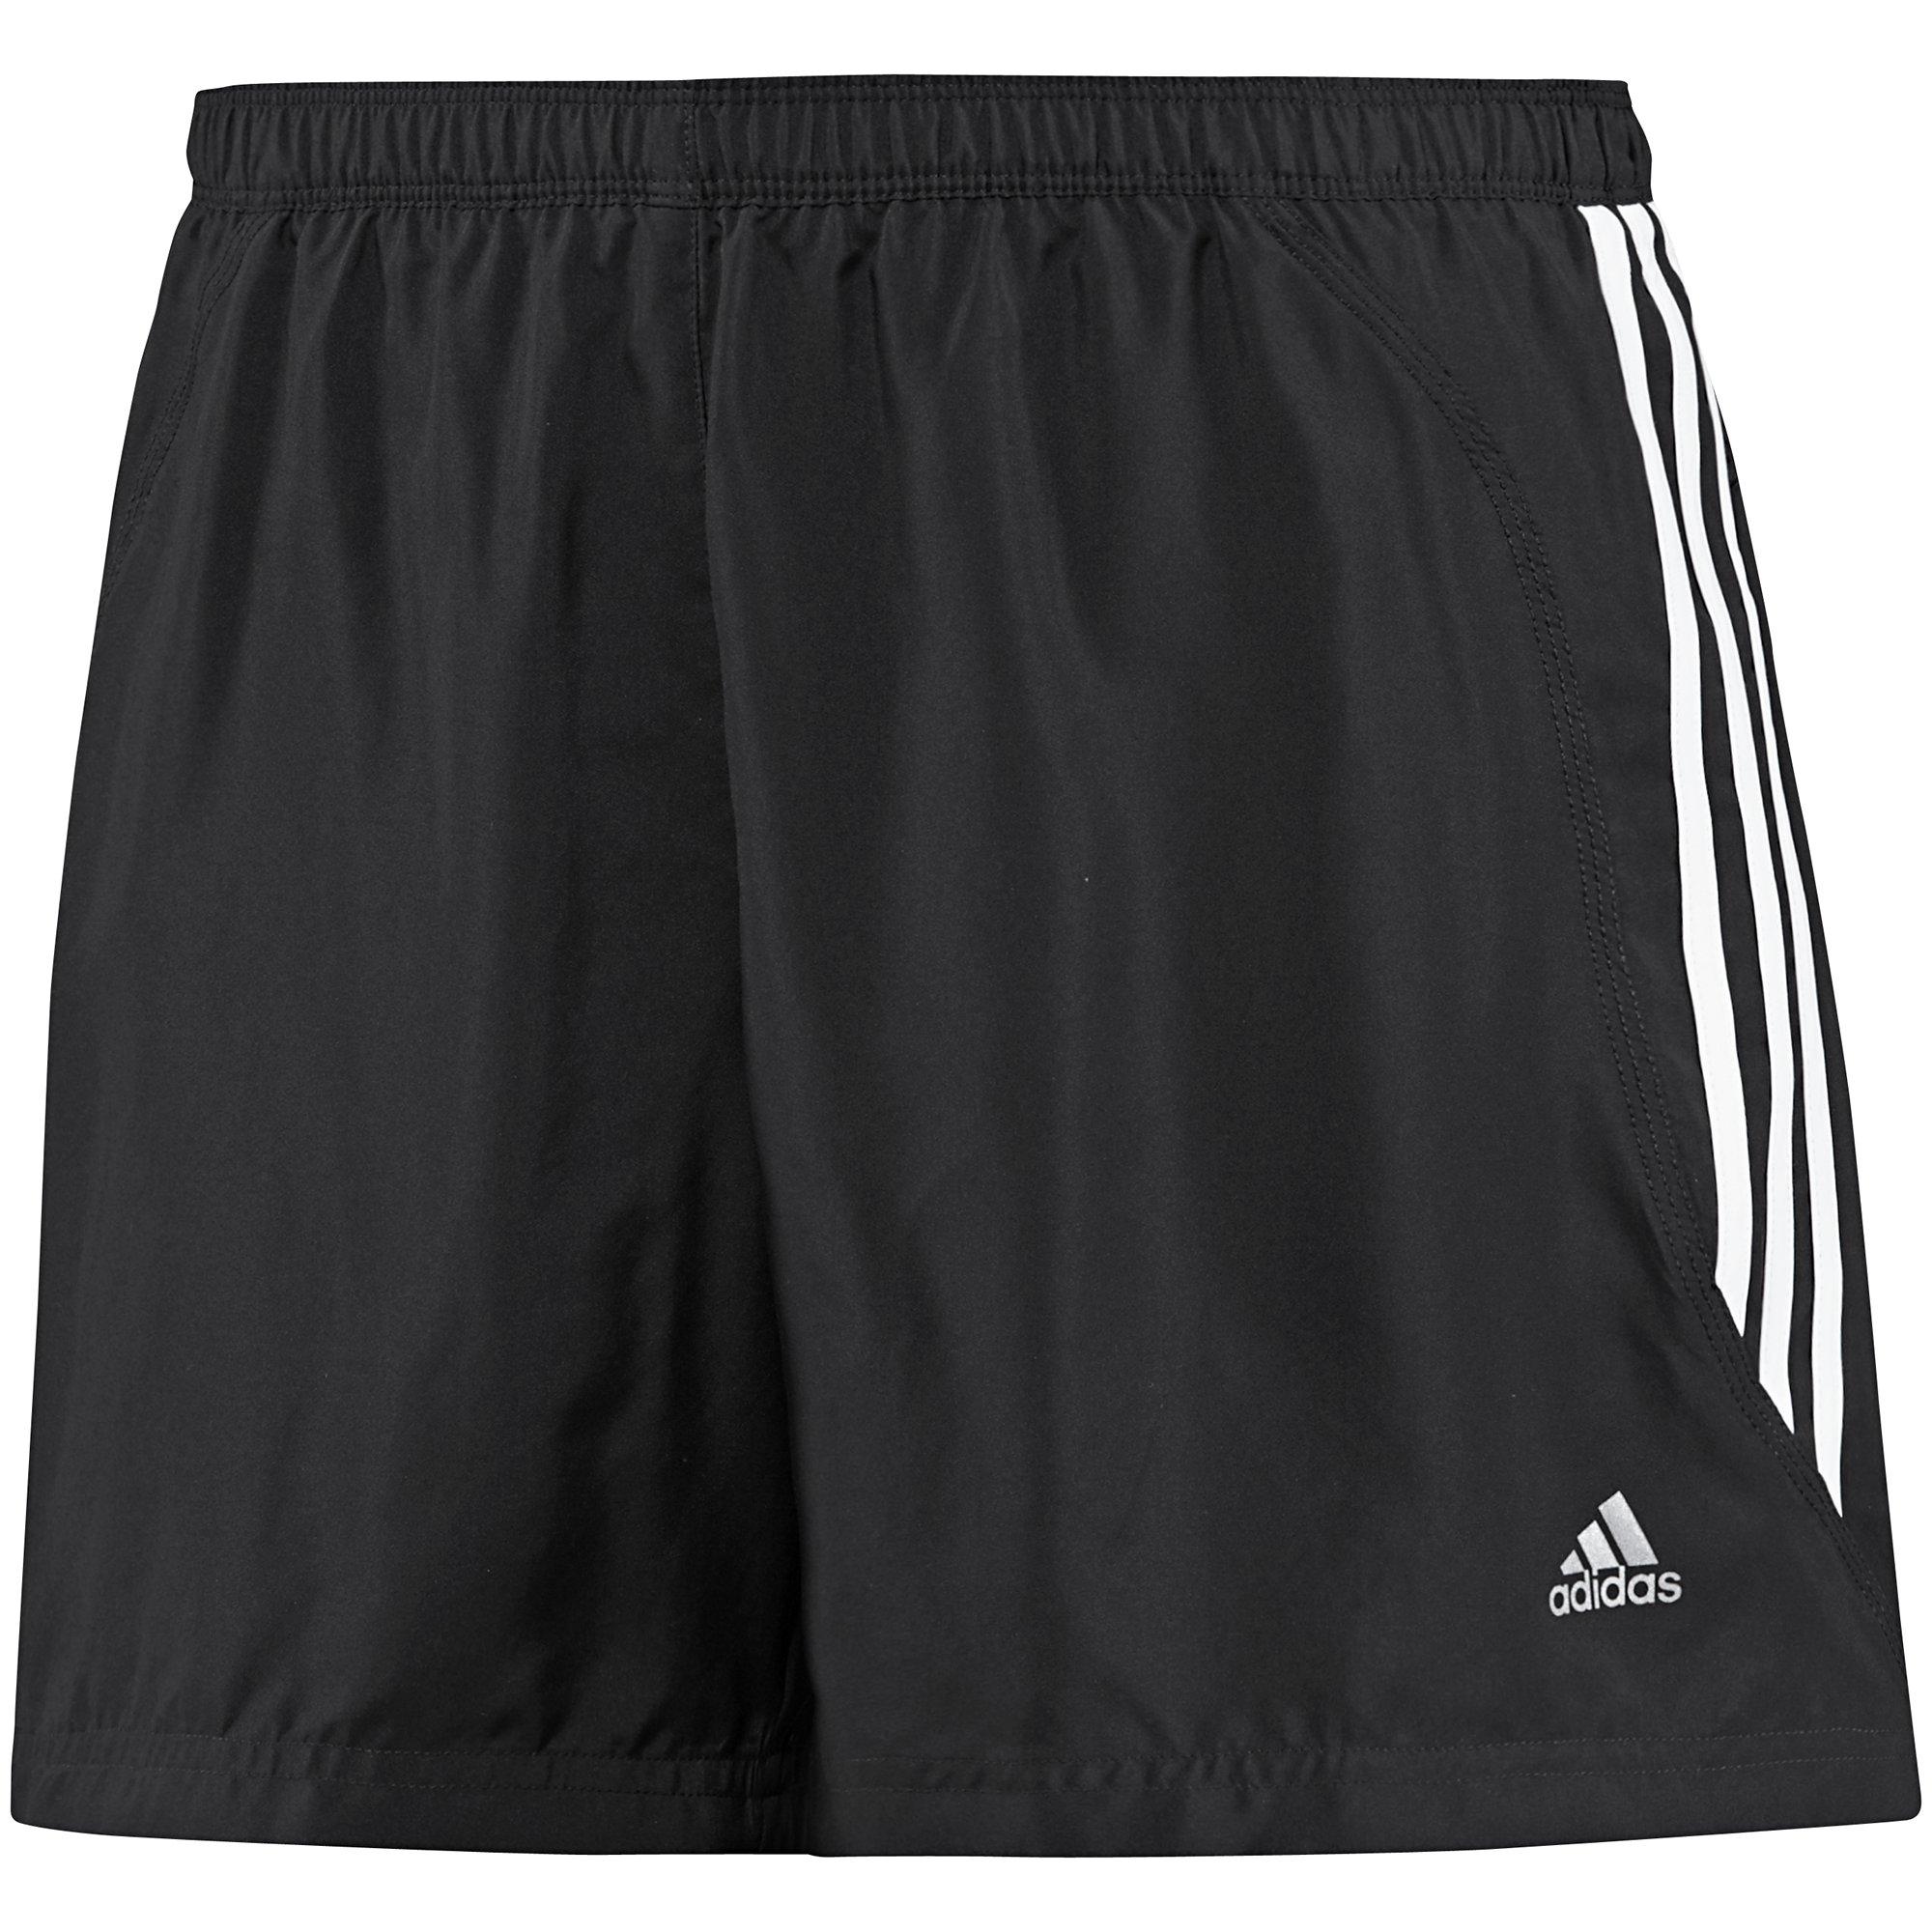 Foto adidas RSP DS Sh 6inch Mujer